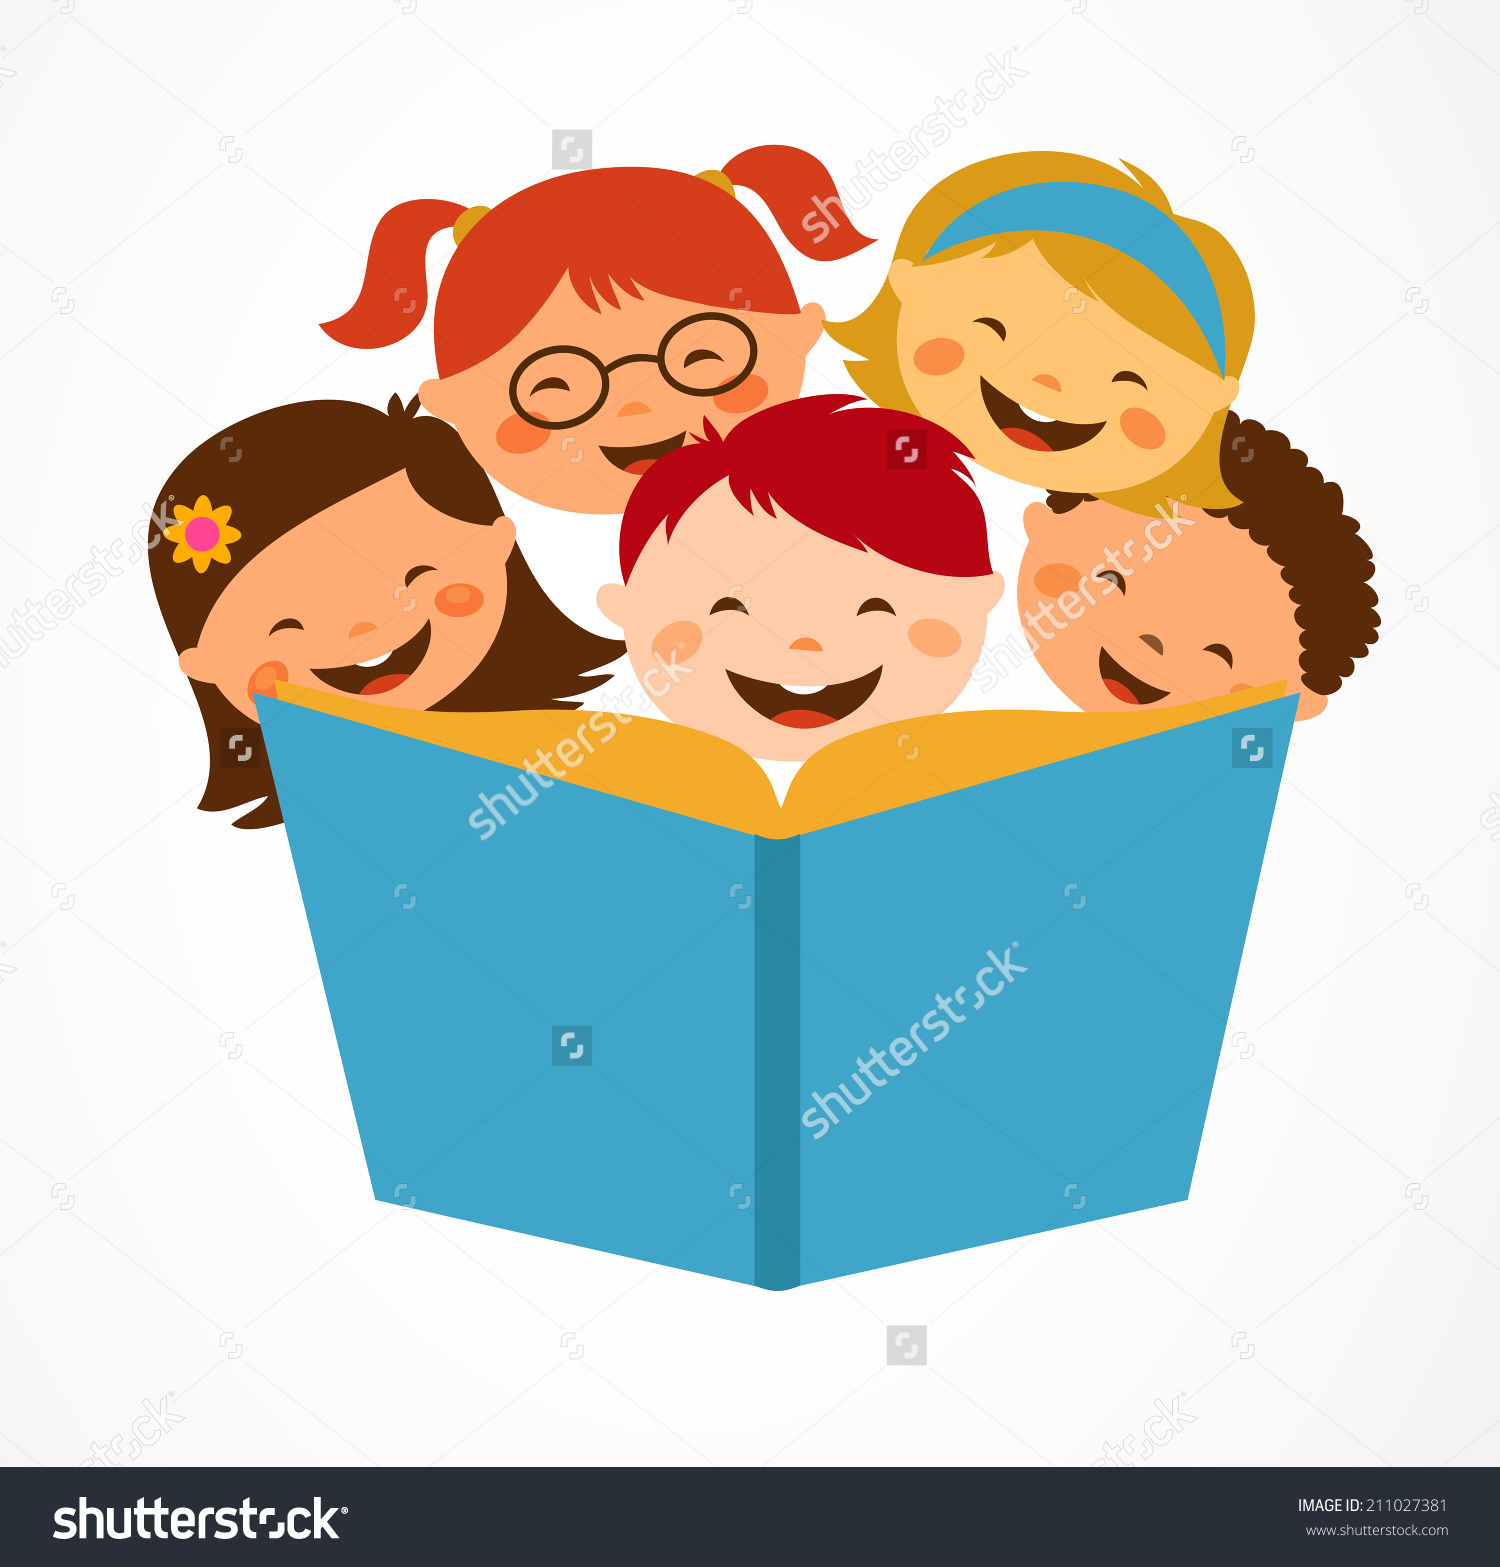 book group clipart - photo #45